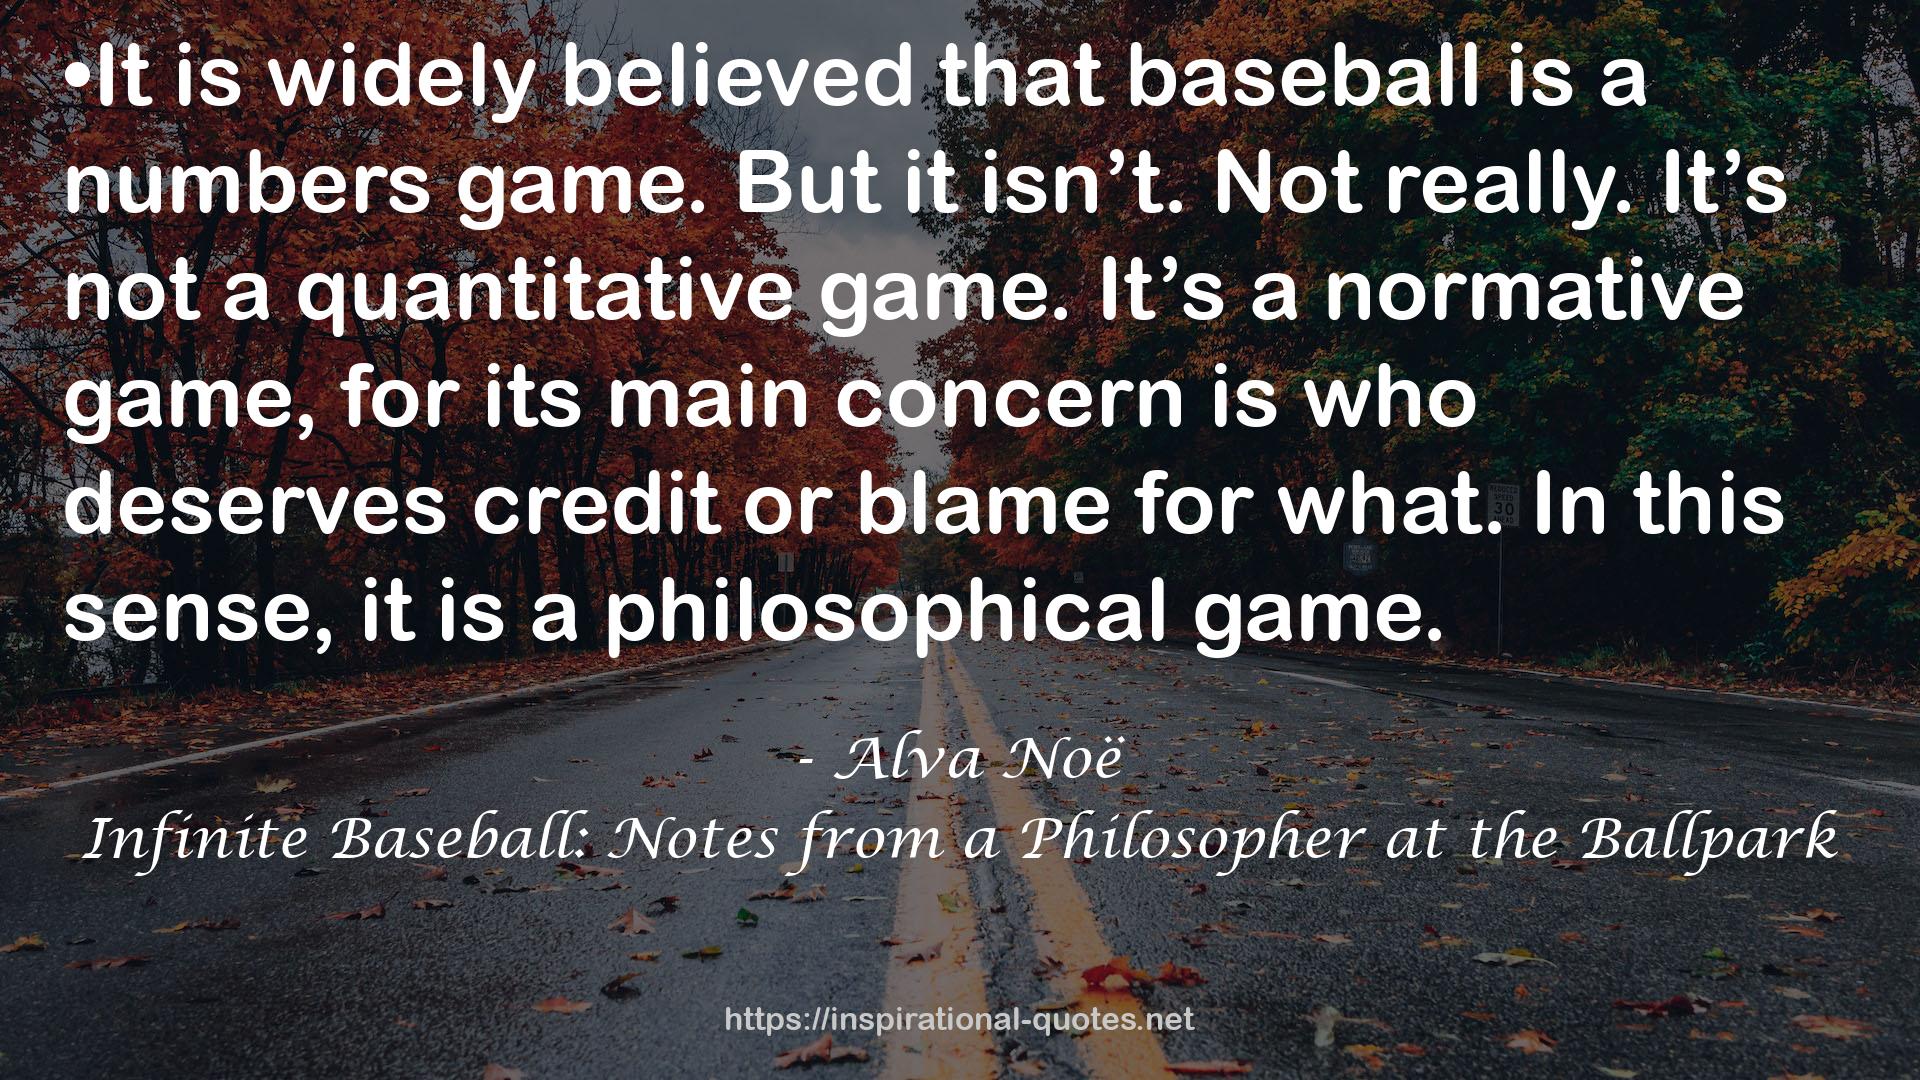 Infinite Baseball: Notes from a Philosopher at the Ballpark QUOTES